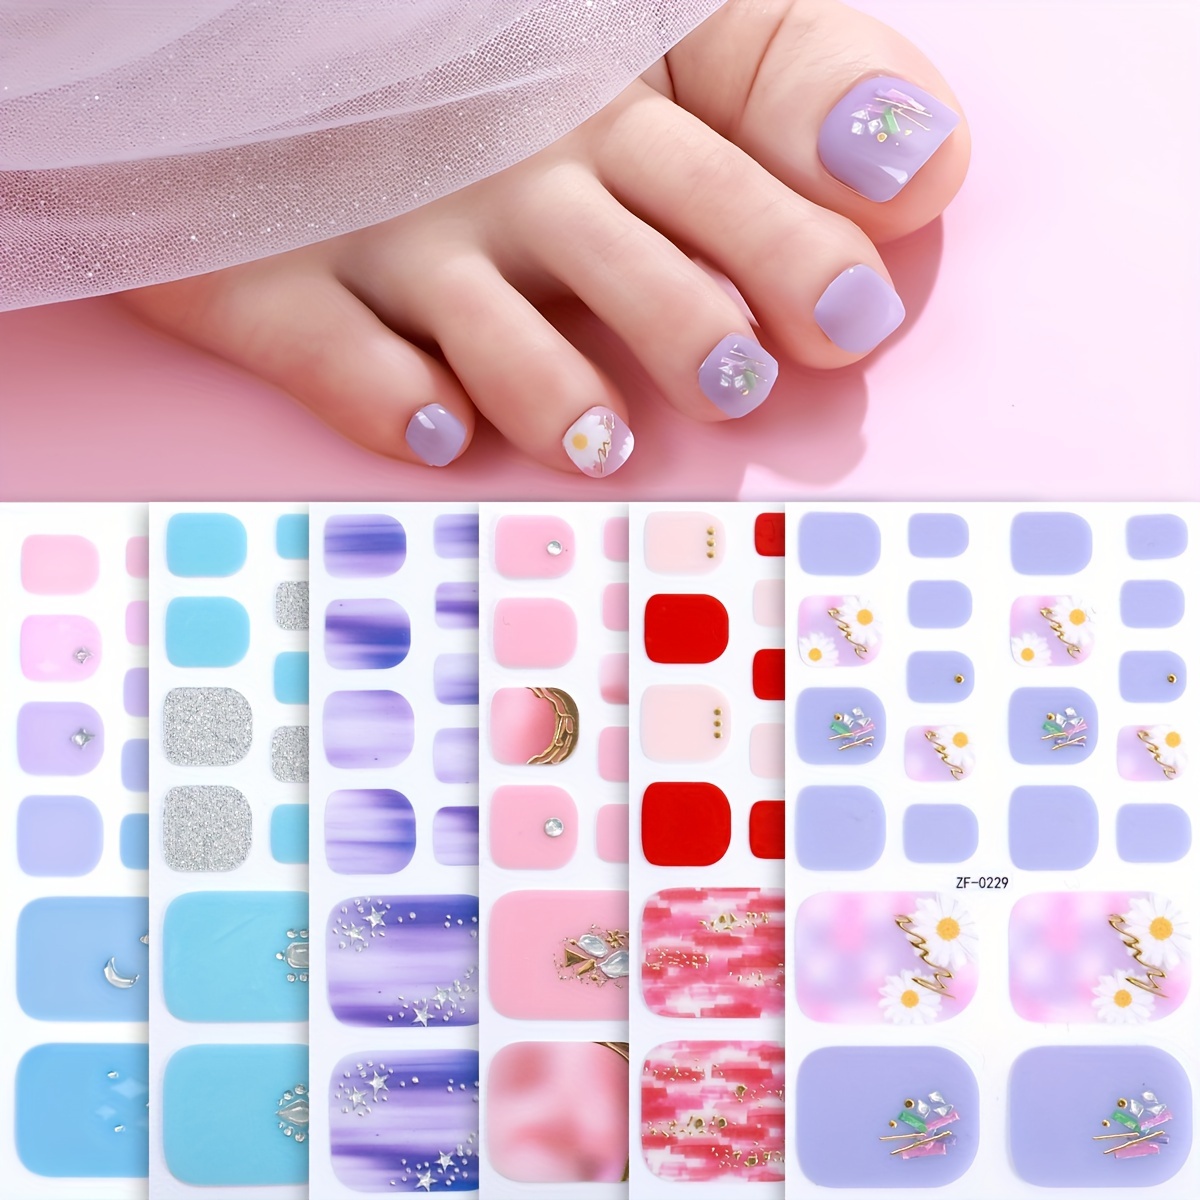 

y2k Glam" 6-pack Spring Halo Toe Nail Strips - Y2k Inspired, Glitter & Diamond Stars & Moons, Self-adhesive Pedicure Decals With 2 Nail Files For Women And Girls, Easy Diy Manicure Kit